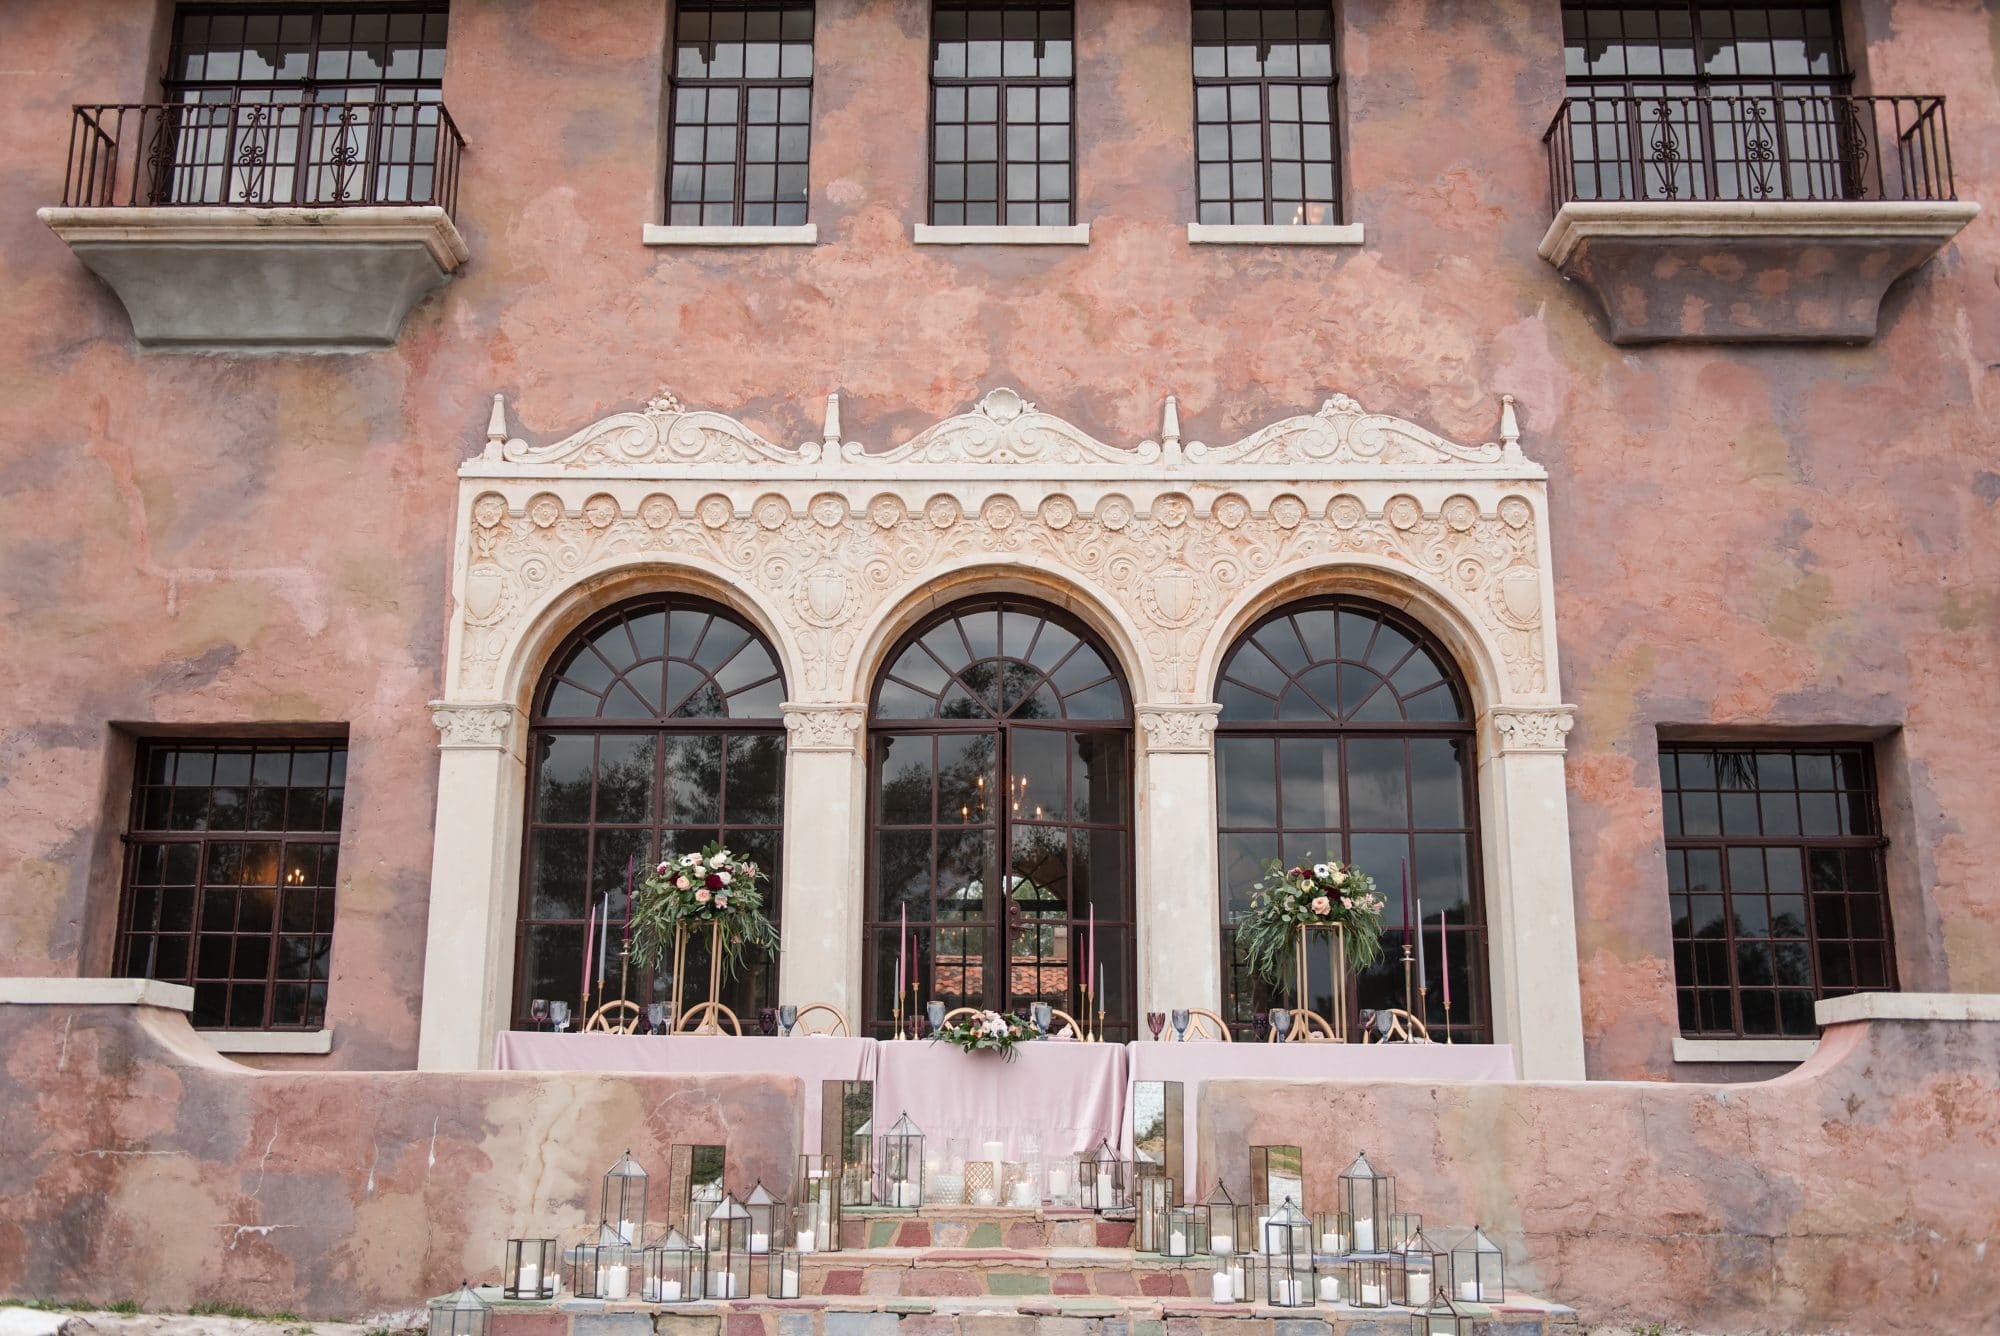 image of outside of historic building with wrought iron railings on balconies and three big windows in front of it decorated with table with light pink linen and candles on stairs going down